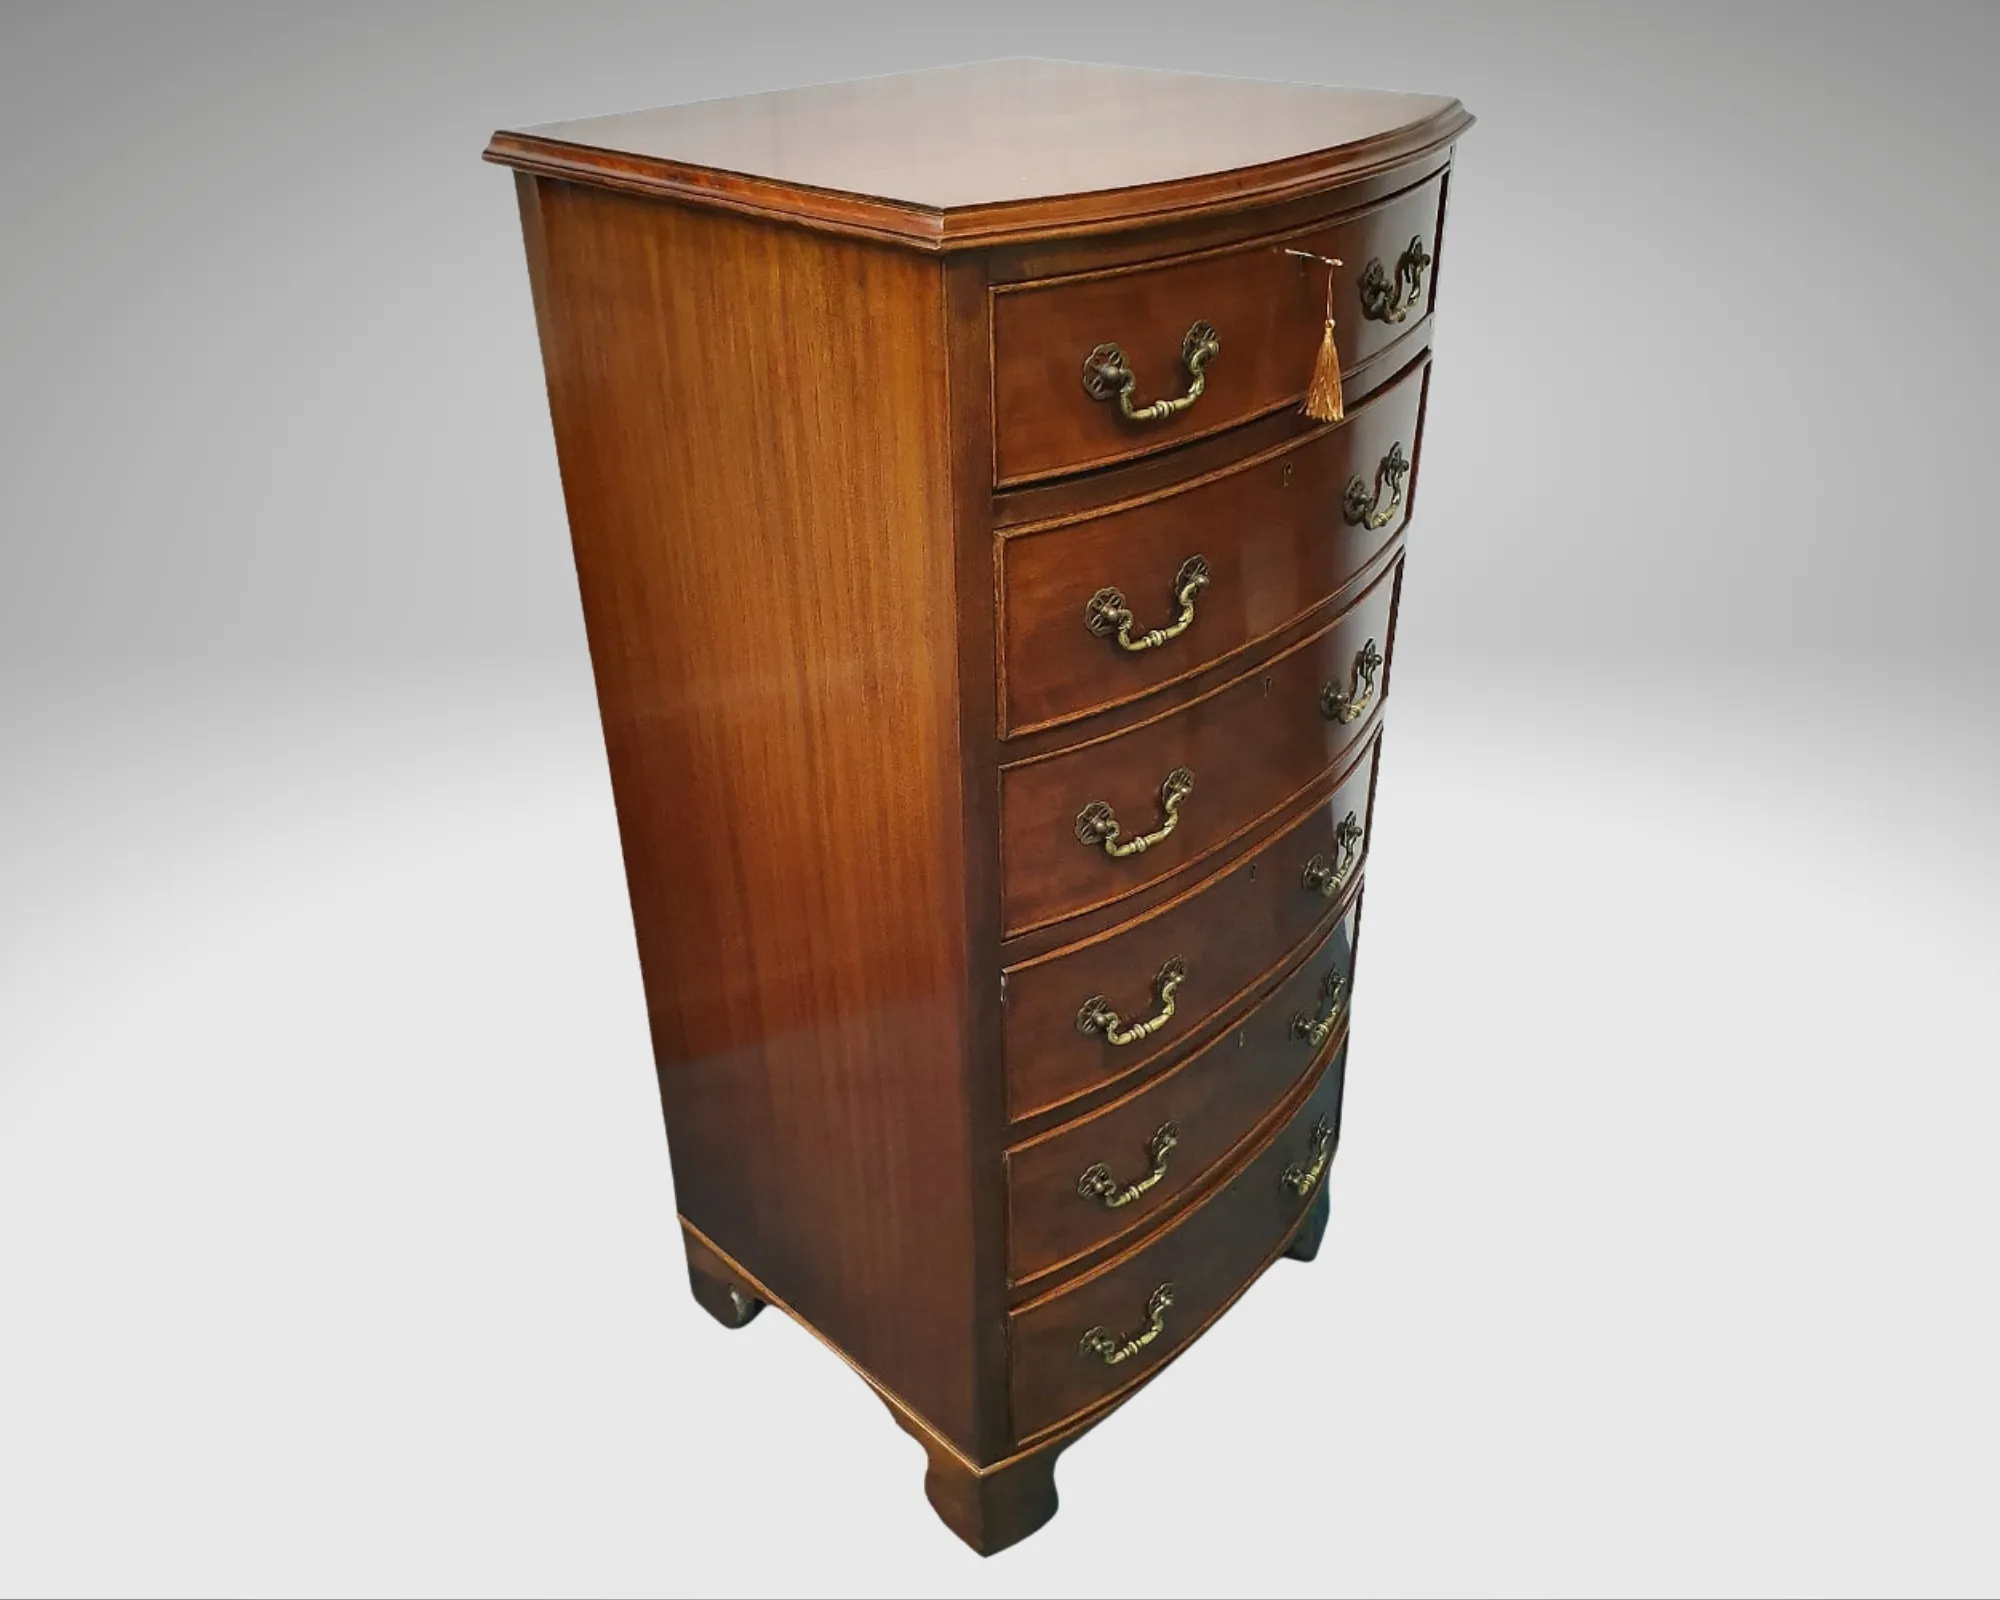  Early 20th Century Mahogany Chest of Drawers